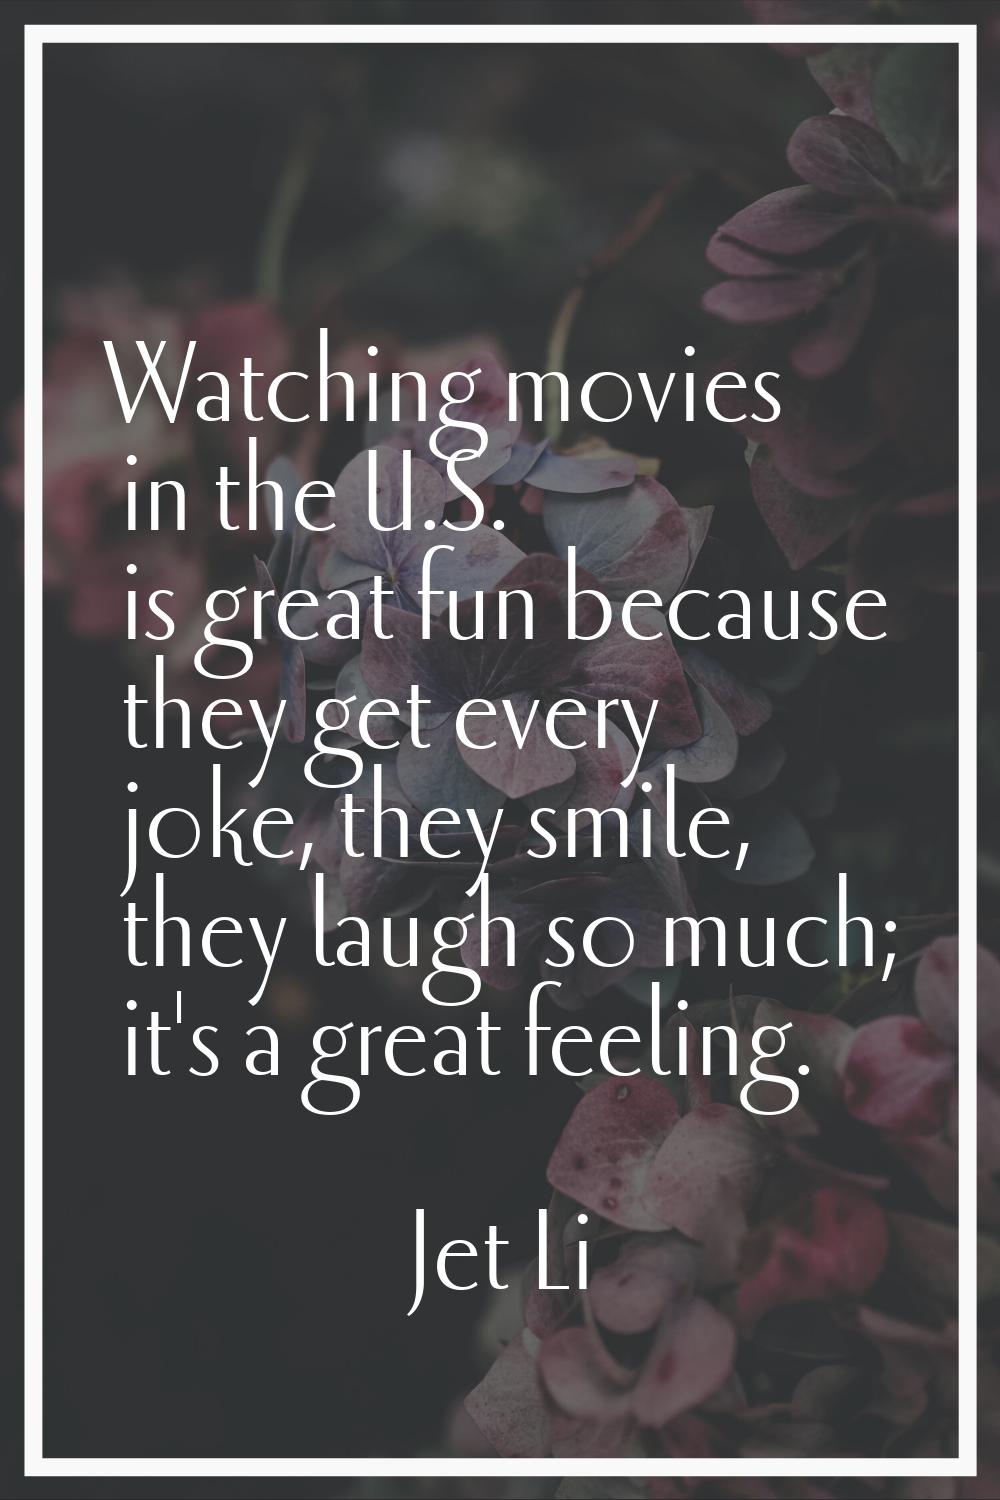 Watching movies in the U.S. is great fun because they get every joke, they smile, they laugh so muc